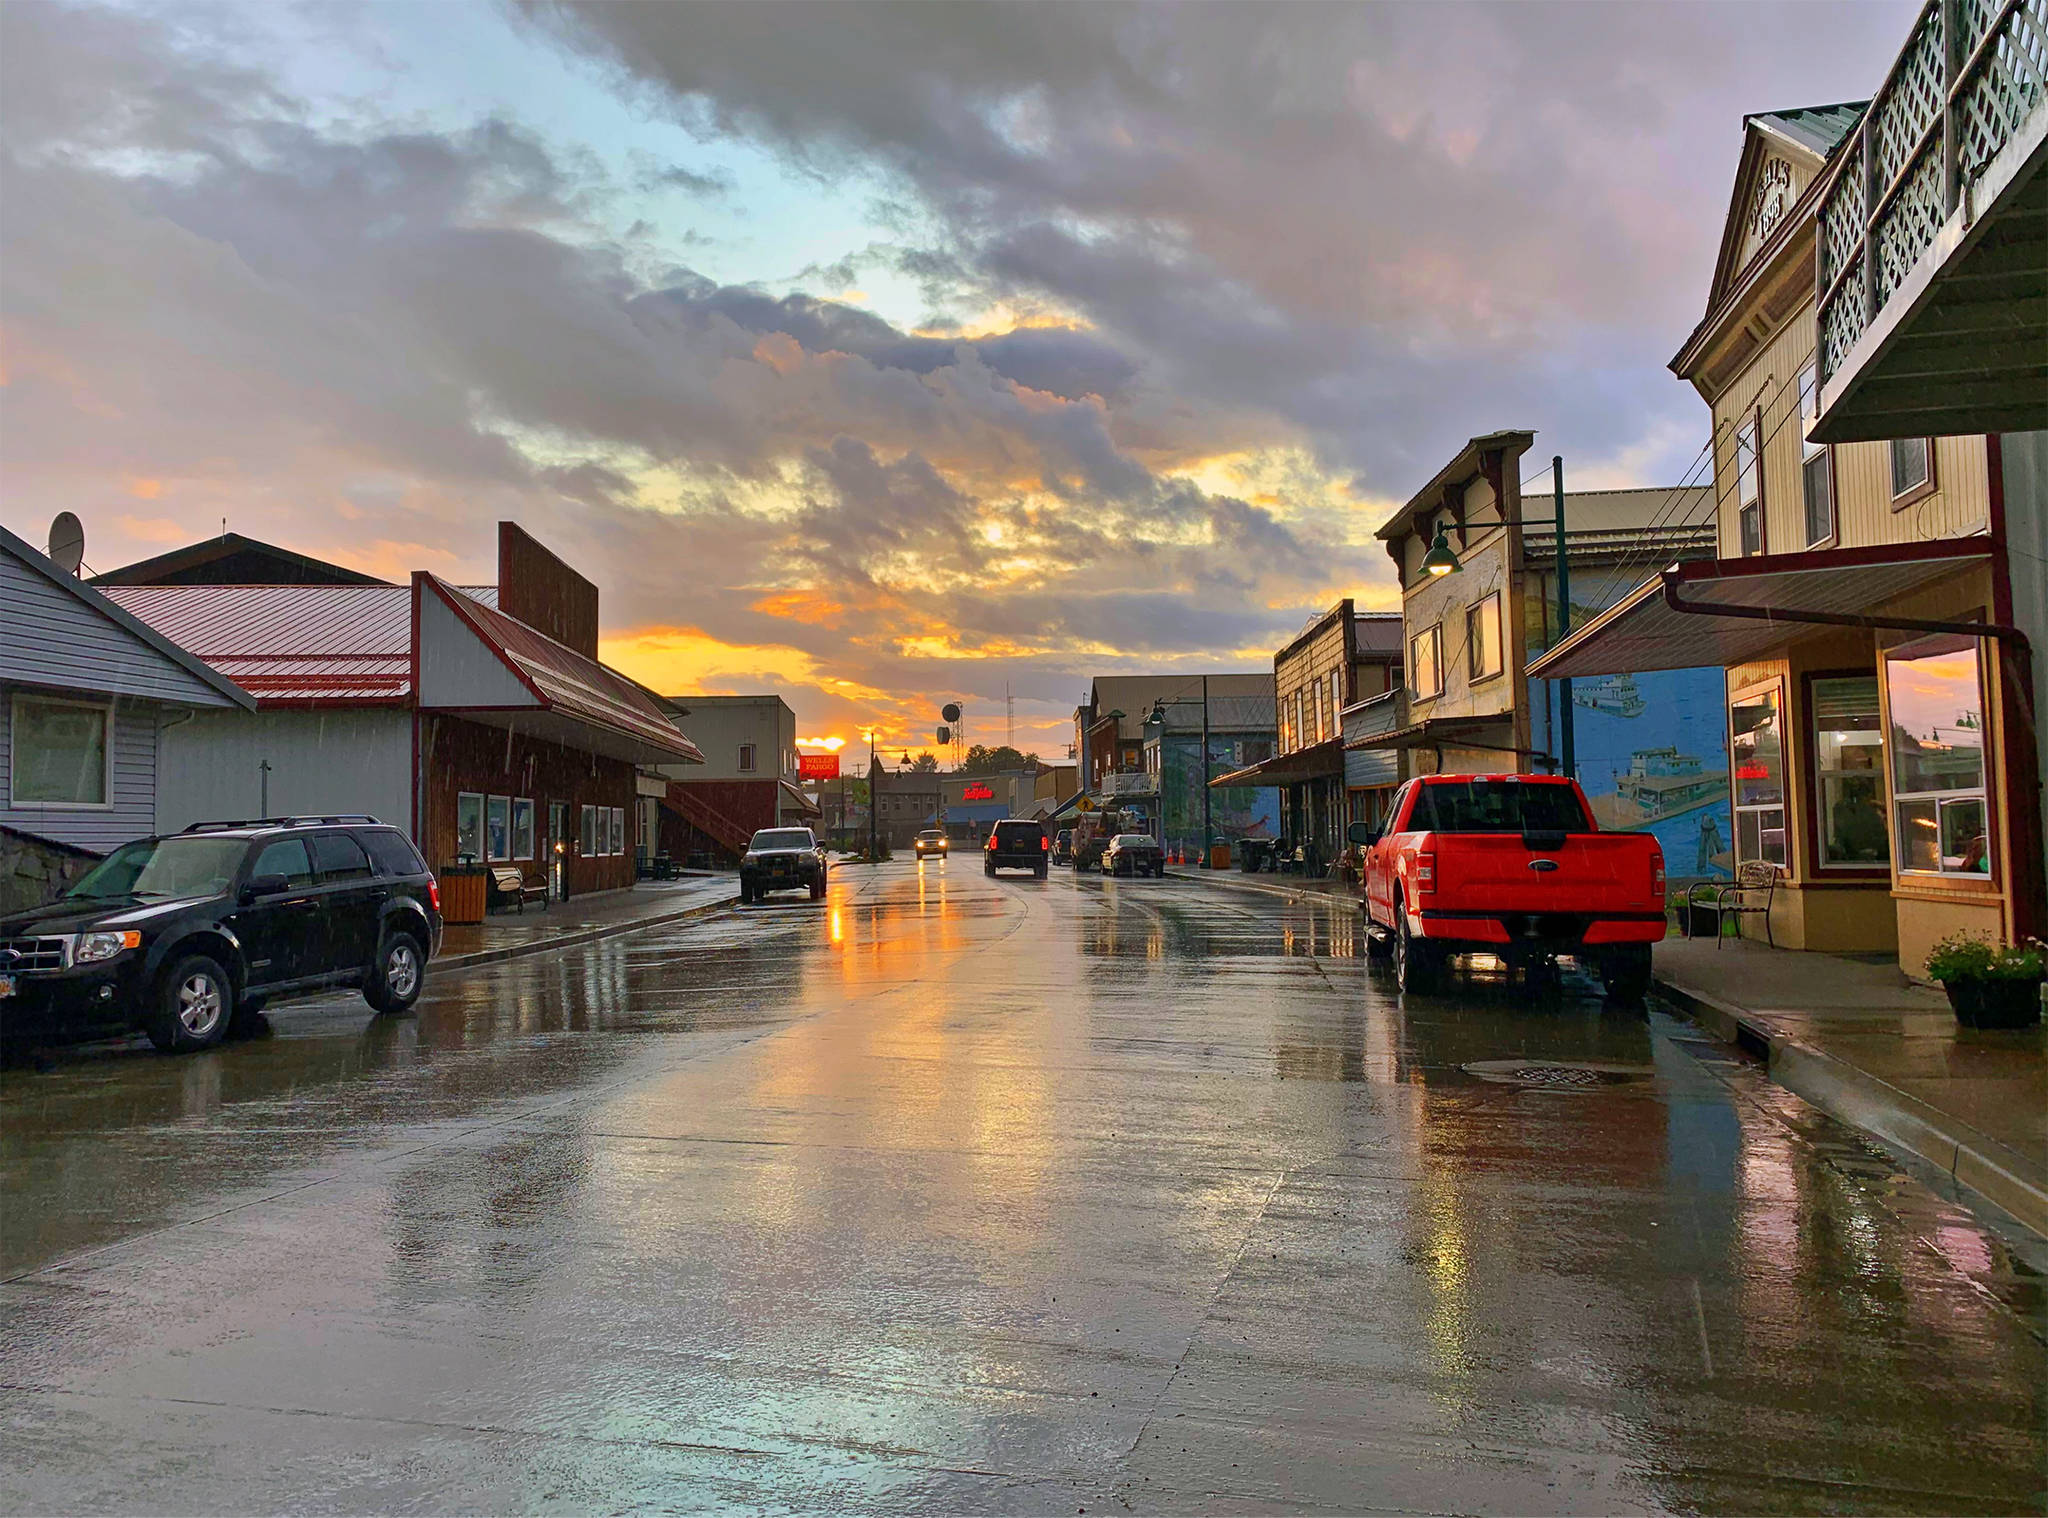 The sun sets on Front Street in Wrangell. (Vivian Faith Prescott | For the Capital City Weekly)